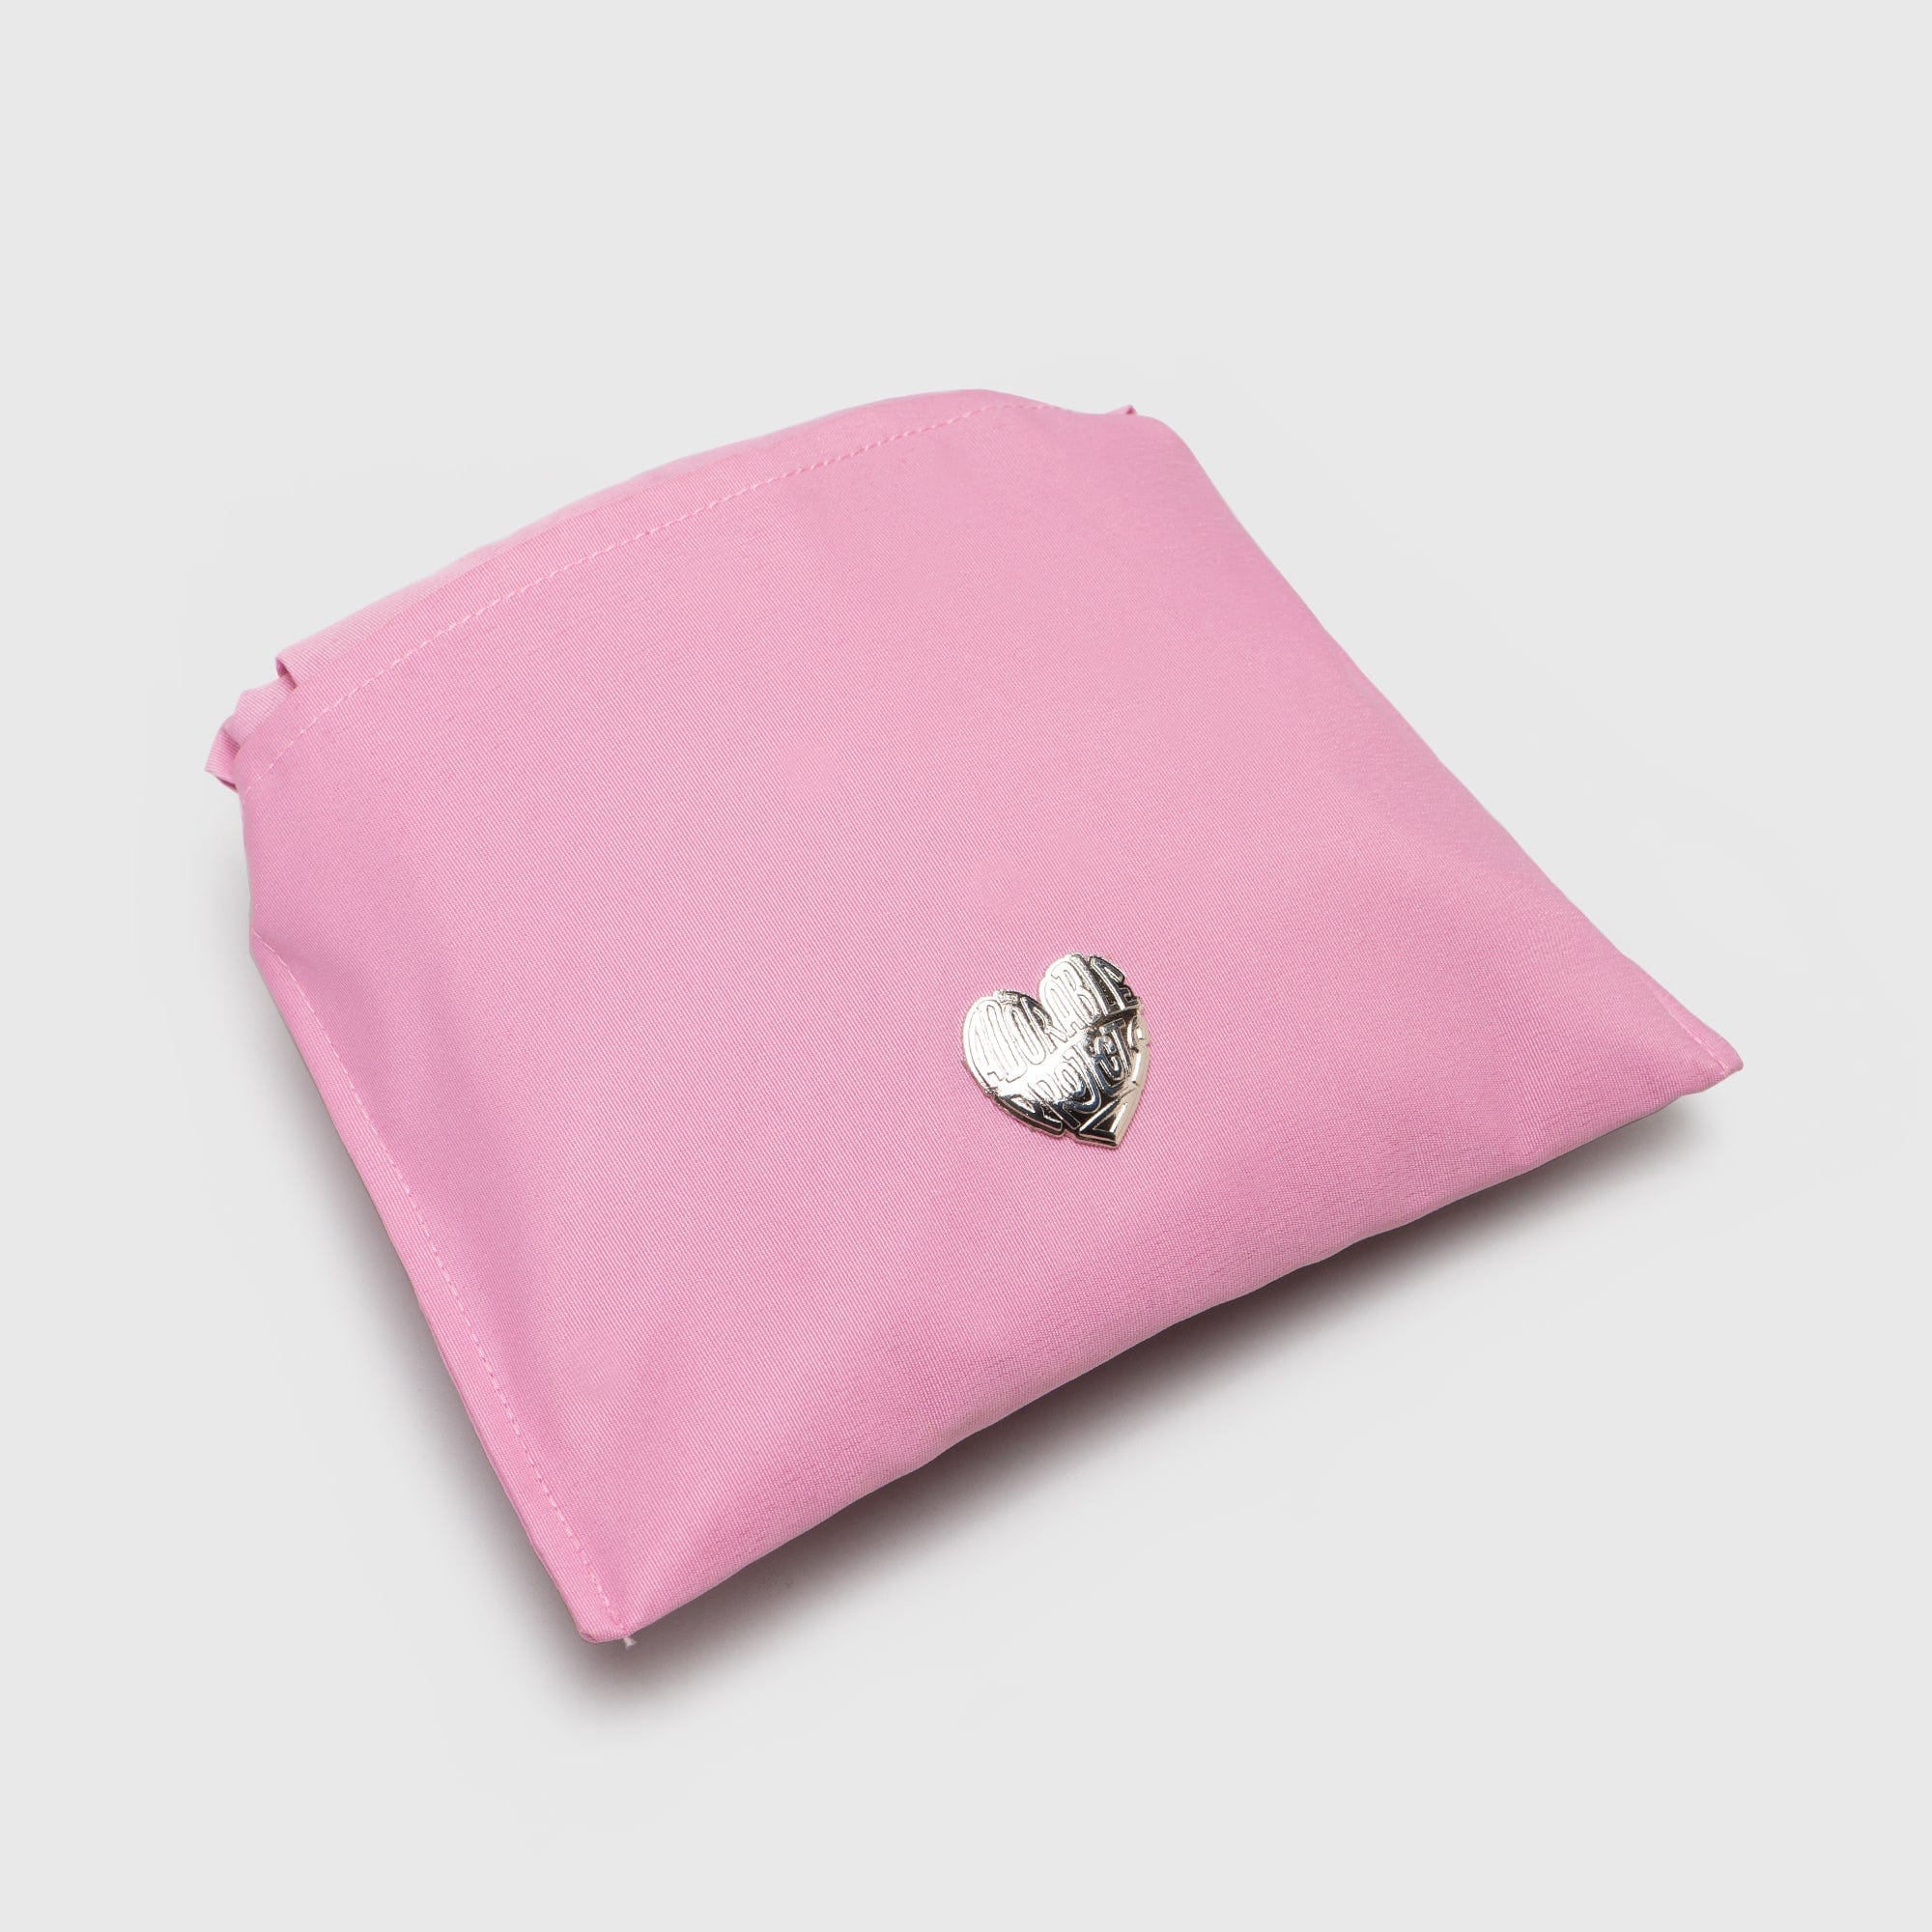 Adorable Projects Official Adorableprojects - Nade Bag Pink - Dumpling Bag